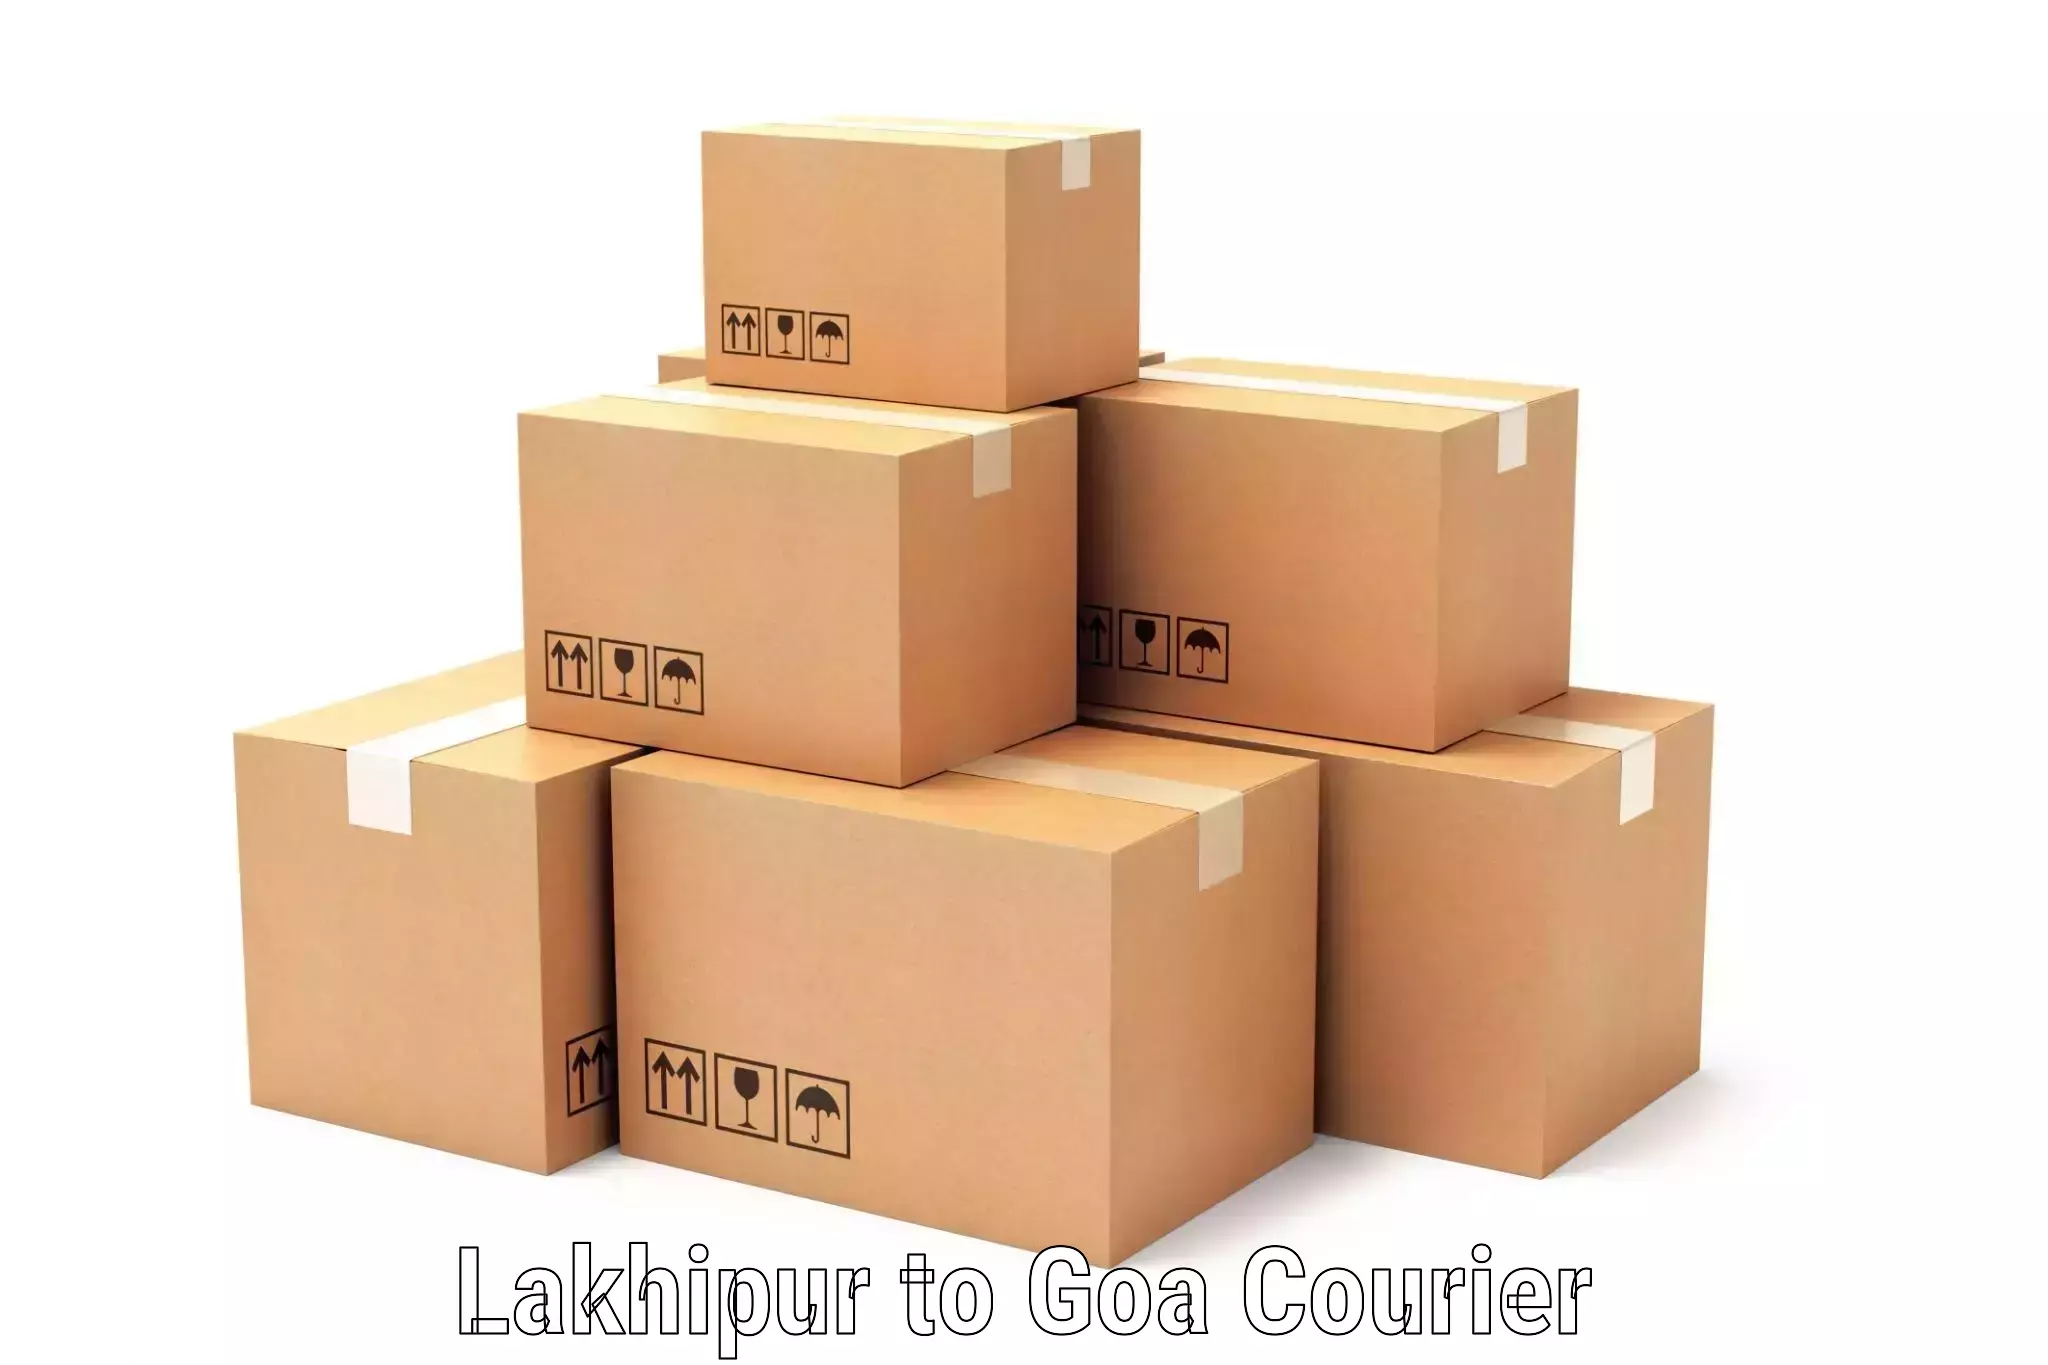 Efficient package consolidation Lakhipur to Mormugao Port